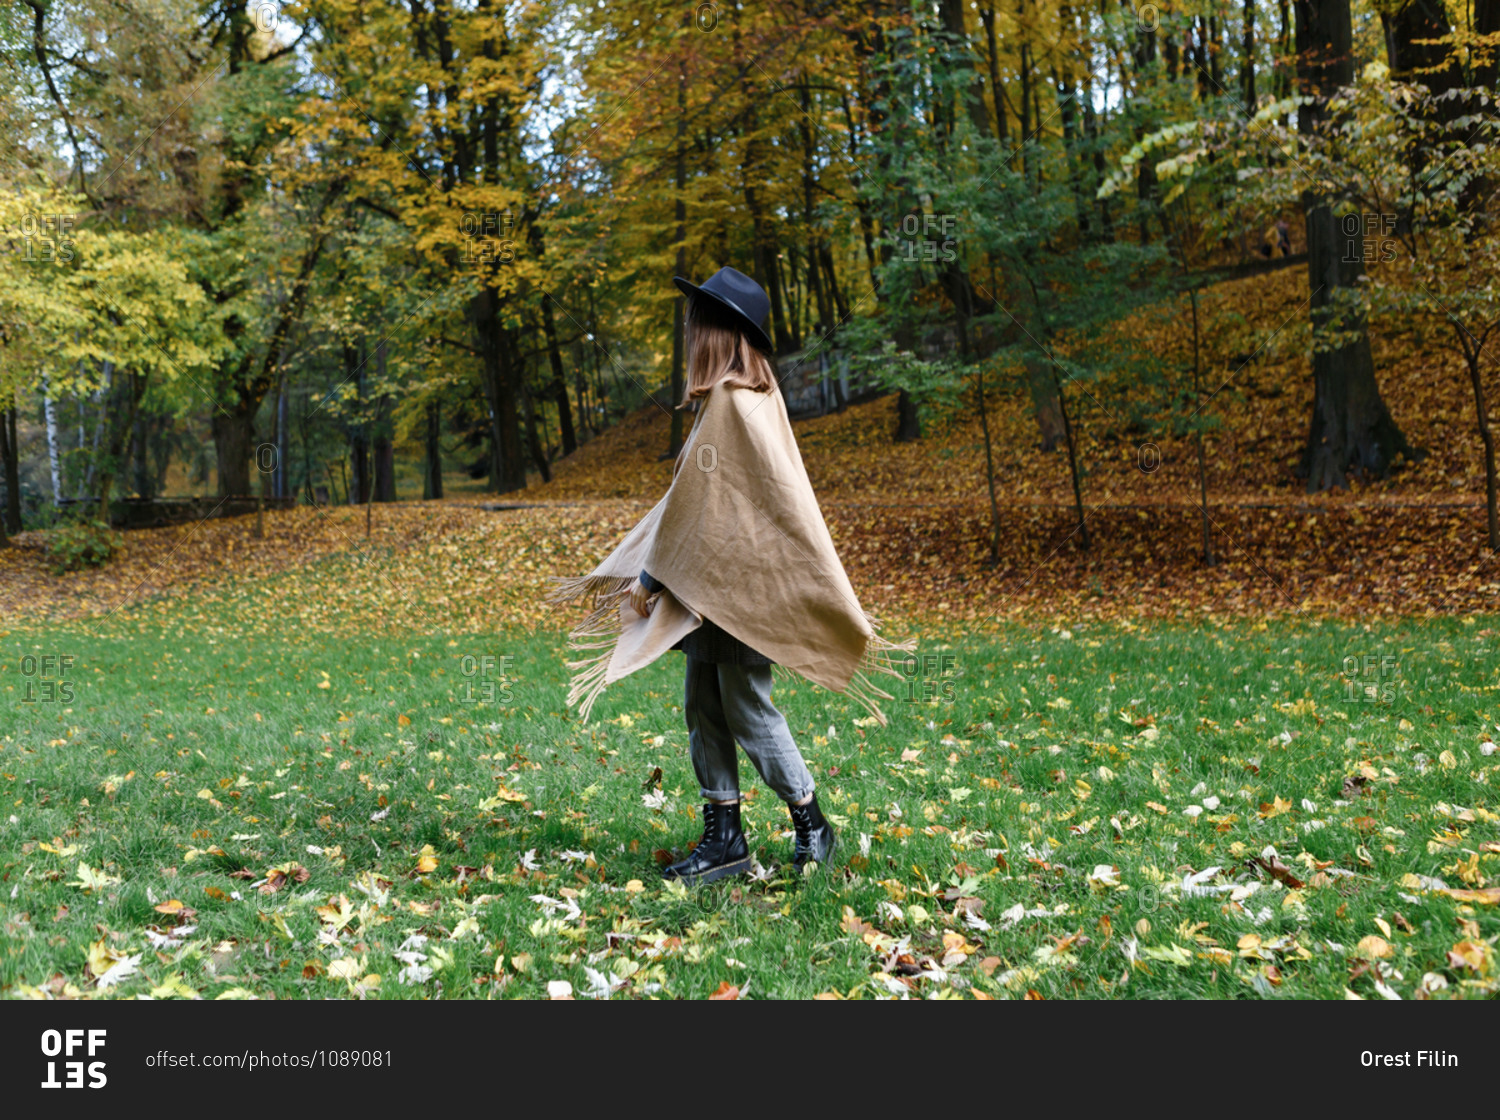 A young woman in a black hat and poncho is dancing on the colorful grass in the park in the autumn season